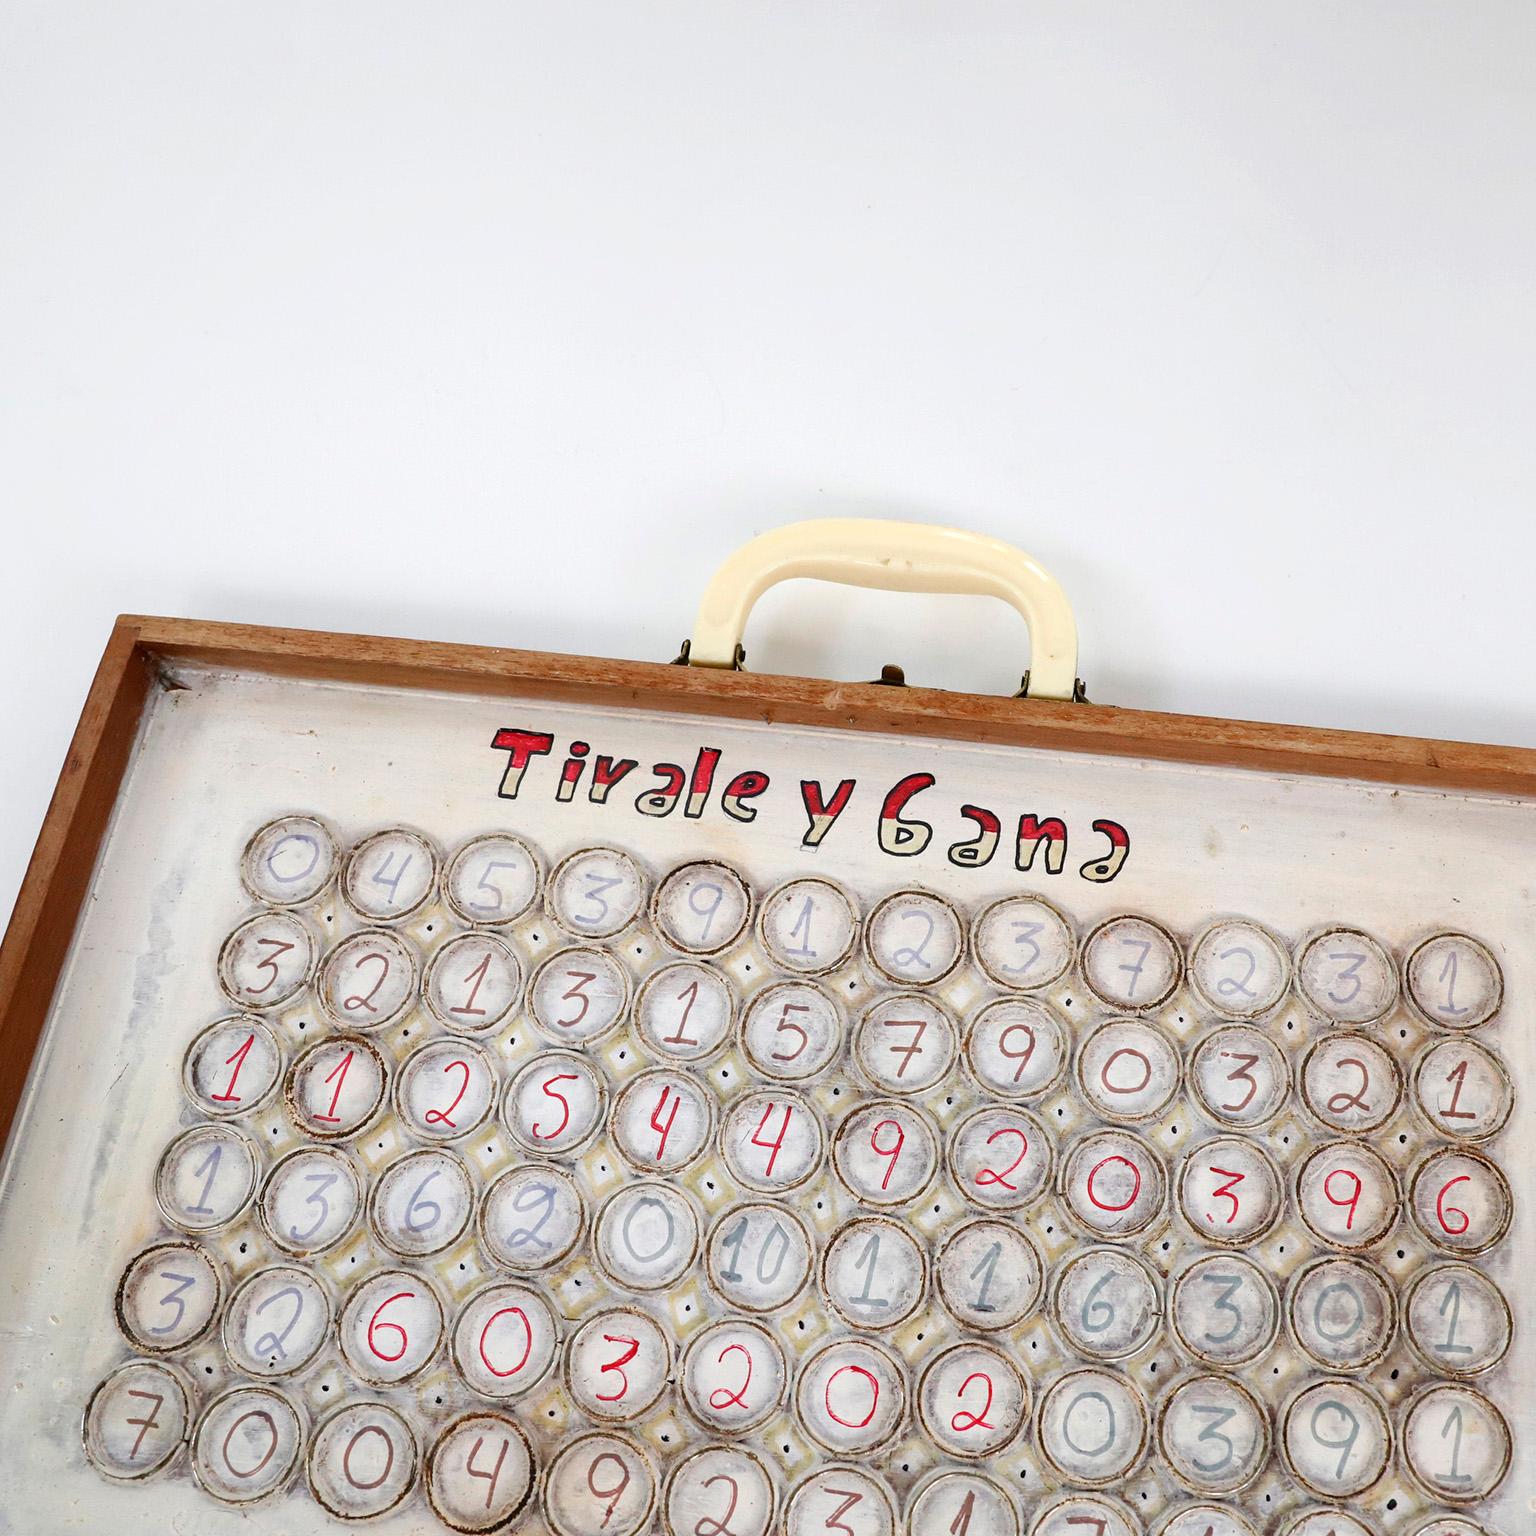 Circa 1980. We offer this Antique portafolio game used in Mexican Fairs.

The piece is placed on the floor and coins are thrown from a certain distance. The idea is that the coins fall inside the circles. this piece can be used for wall decoration